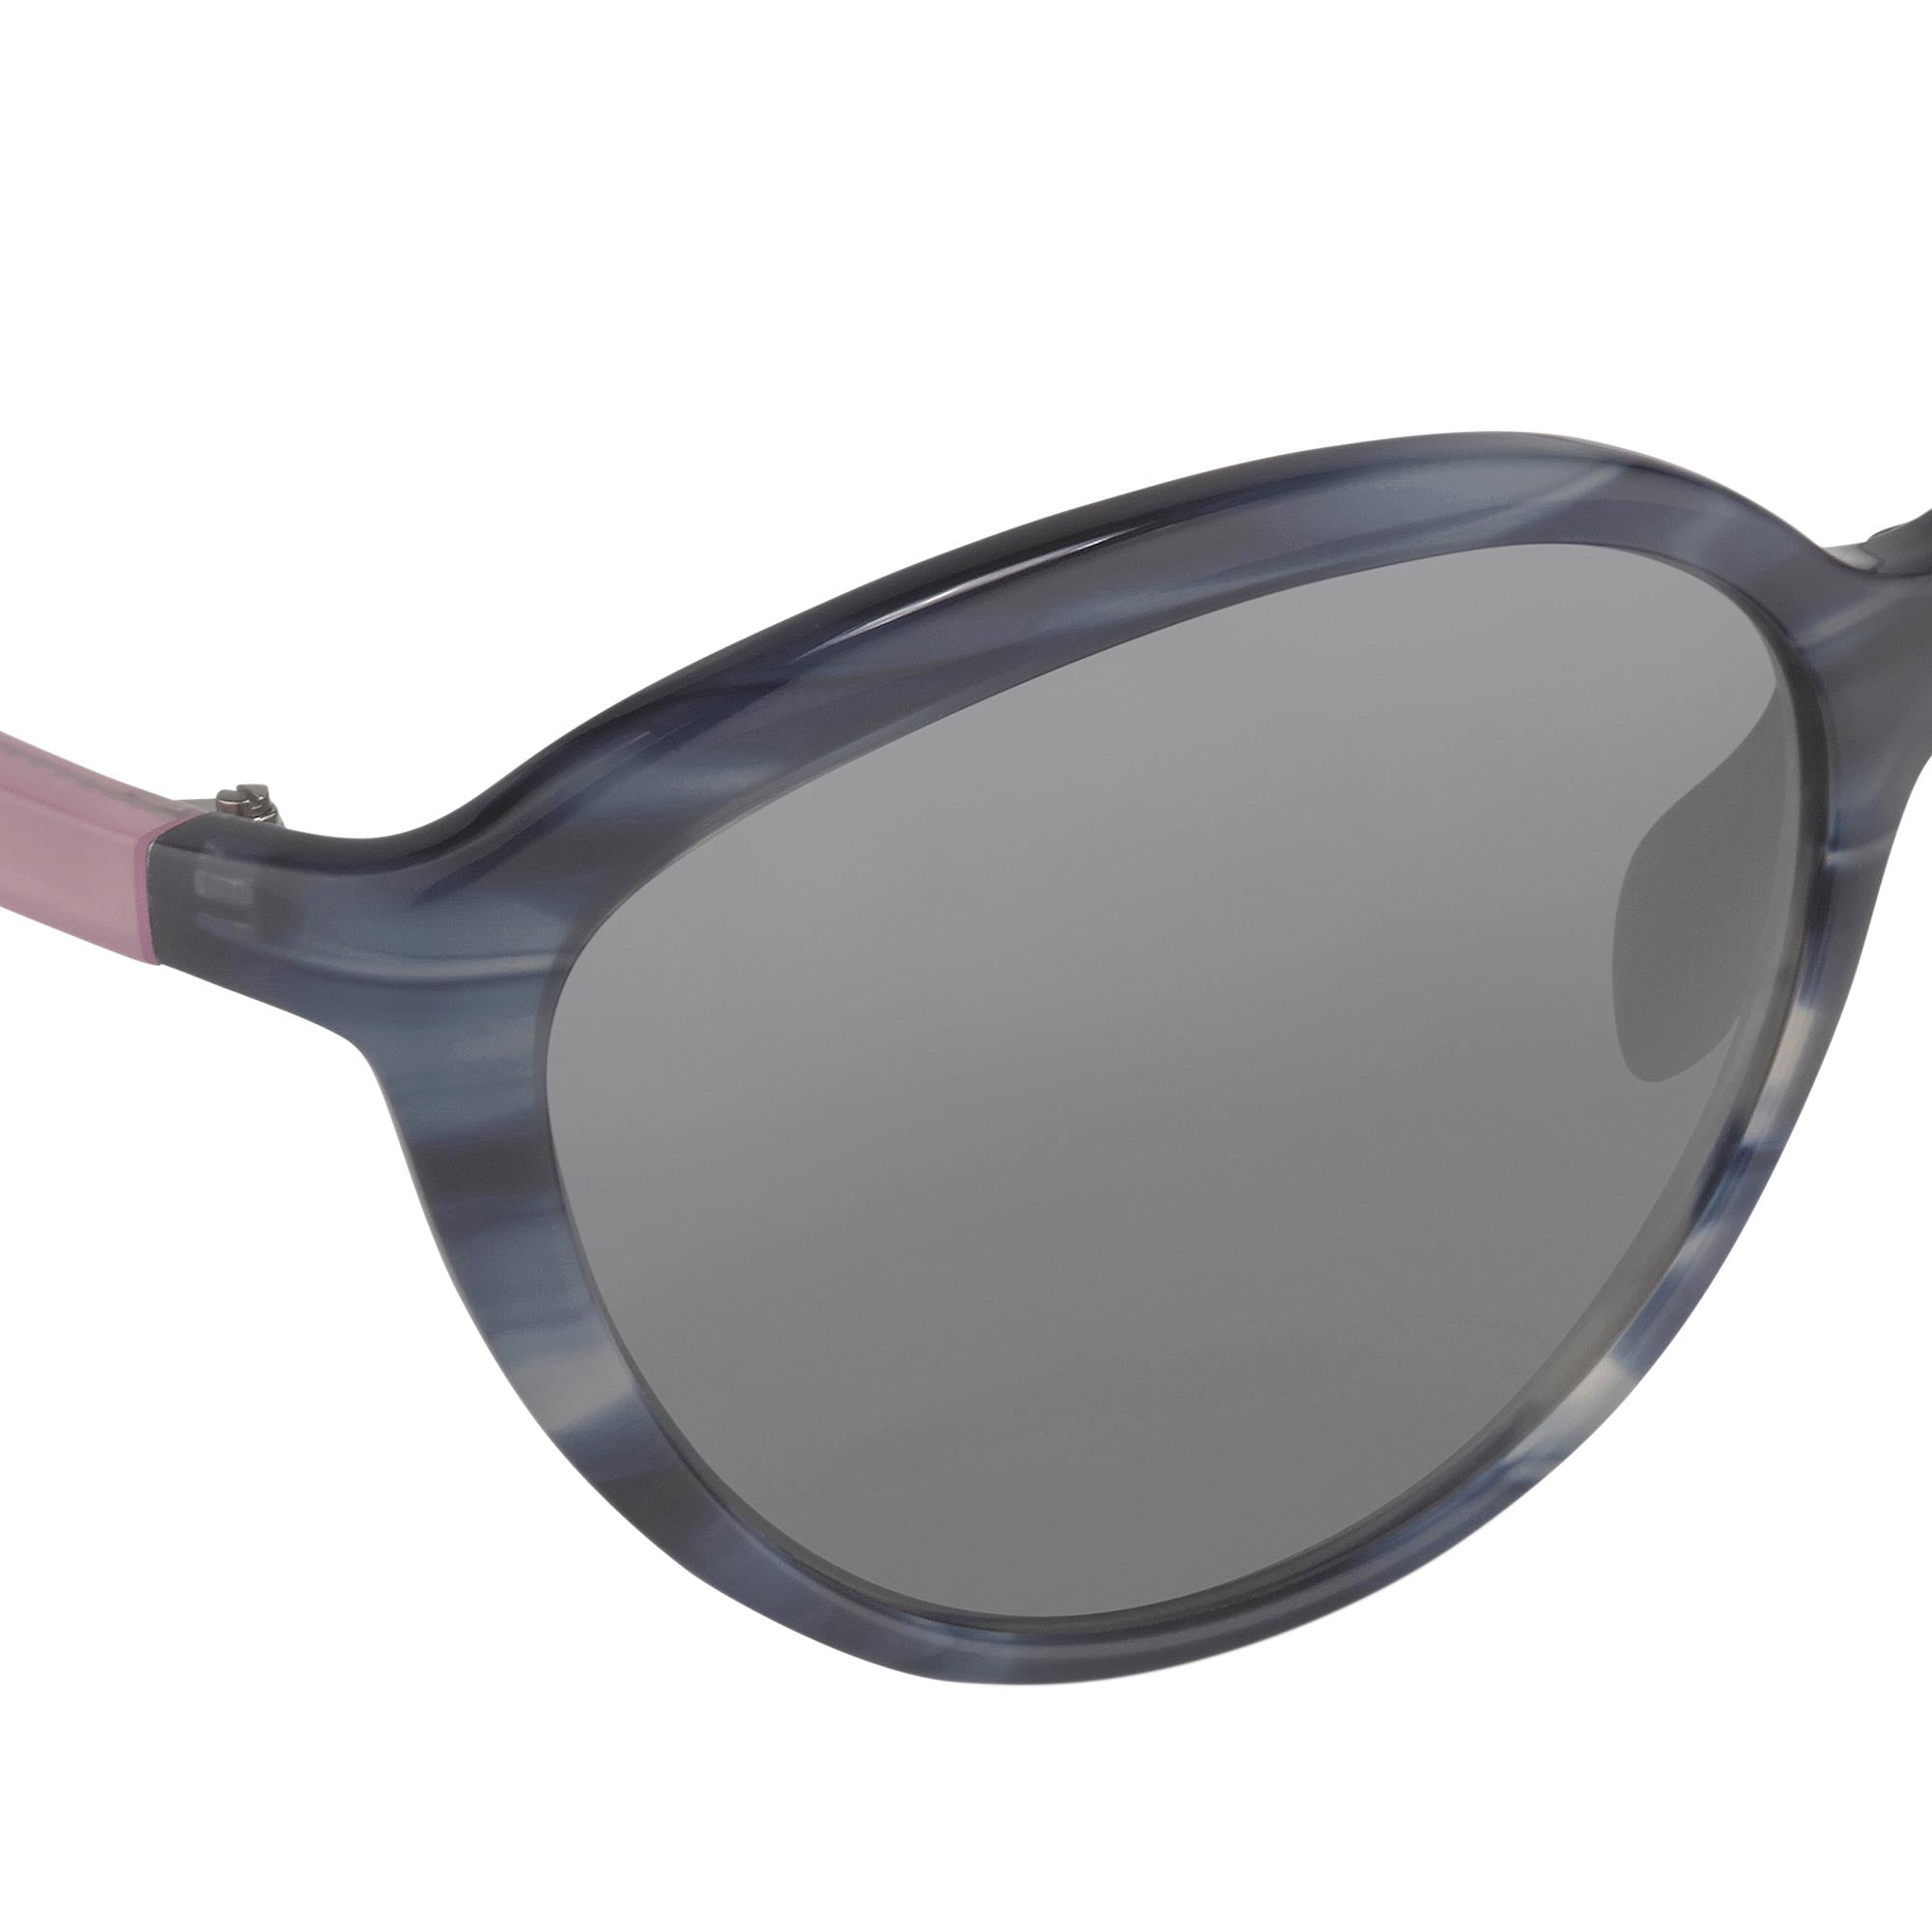 Prabal Gurung Sunglasses Female Oversized Blue Horn and Clear Pink/Black Category 3 Grey Mirror Lenses PG22C1SUN - Watches & Crystals